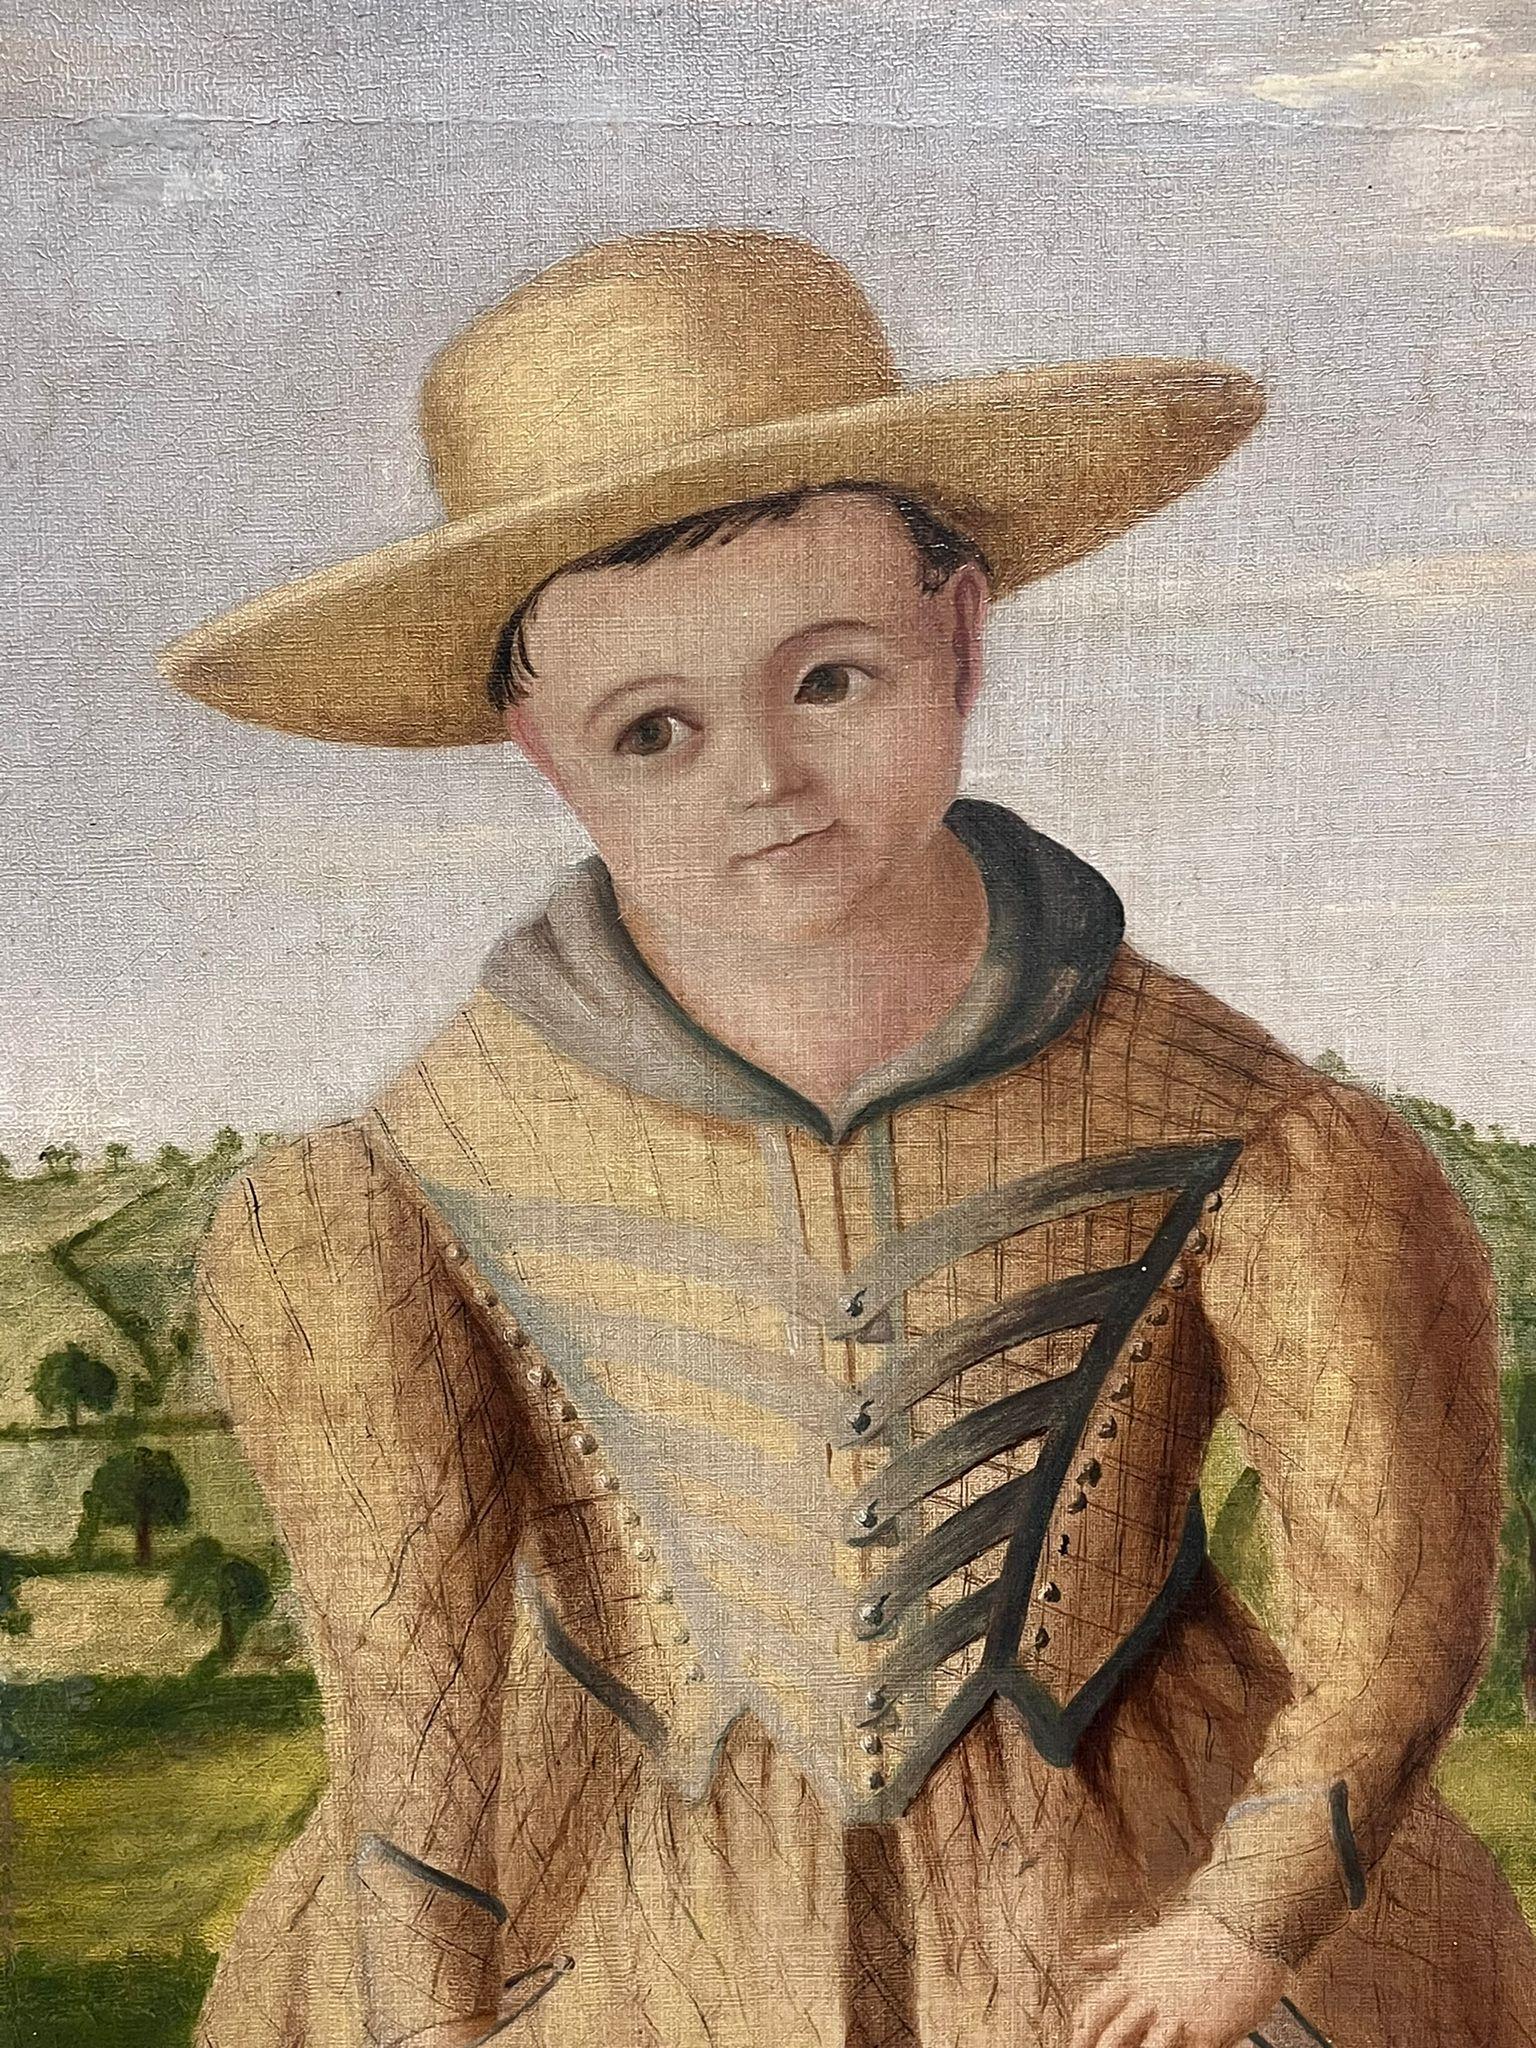 Artist/ School: American School, mid 19th century

Title: Portrait of a Child dressed in a hat and their 'Sunday best', with small pet dog in a landscape. 

Medium: oil on canvas, unframed

Painting: 25.5 x 18 inches

Provenance: private collection,